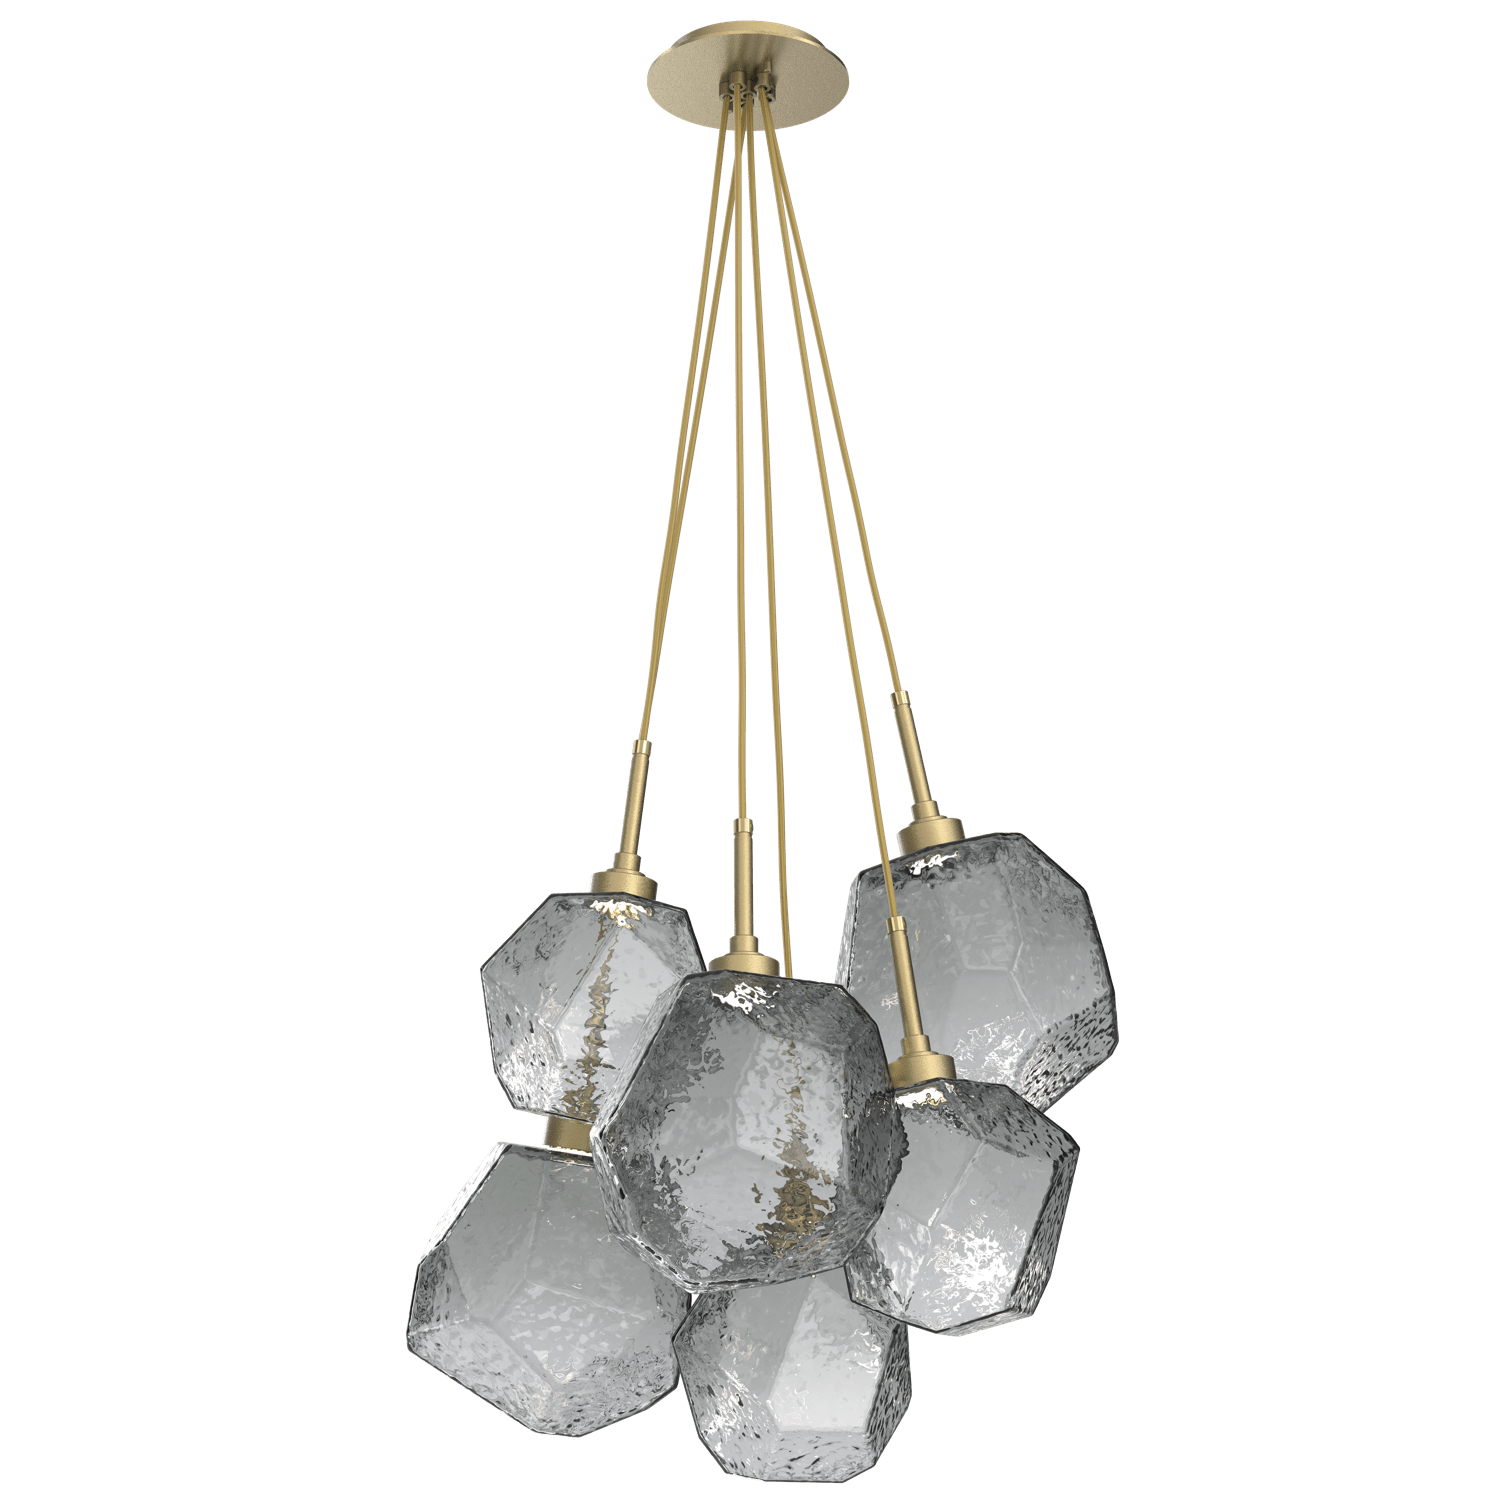 CHB0039-0F-GB-S-Hammerton-Studio-Gem-6-light-cluster-pendant-light-with-gilded-brass-finish-and-smoke-blown-glass-shades-and-LED-lamping